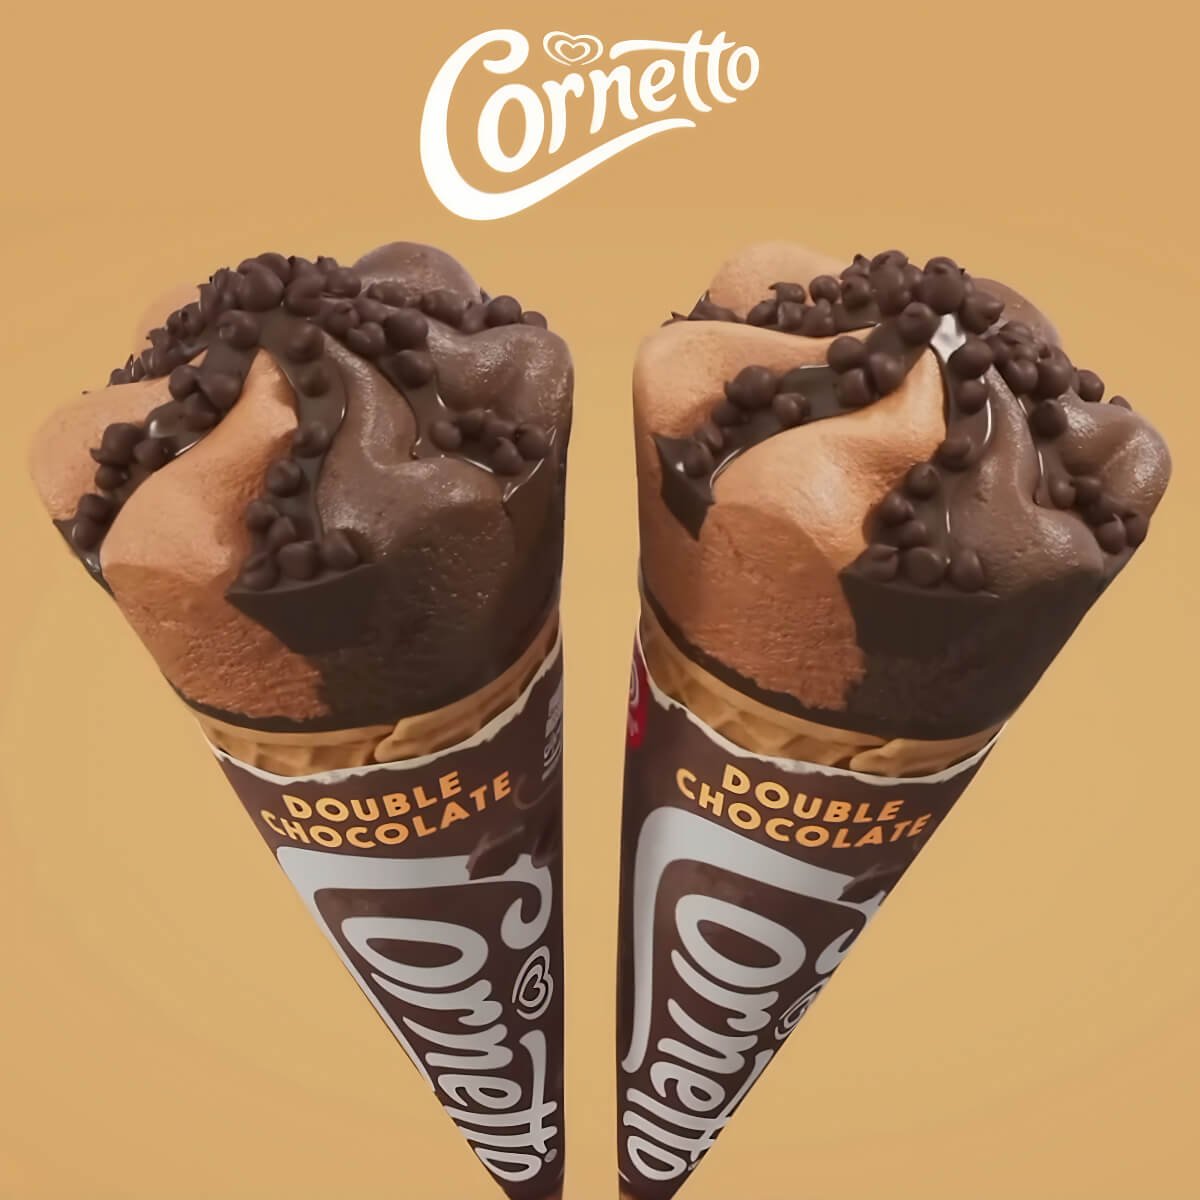 Two Wall's Cornetto cones with logo, Double Chocolate flavour